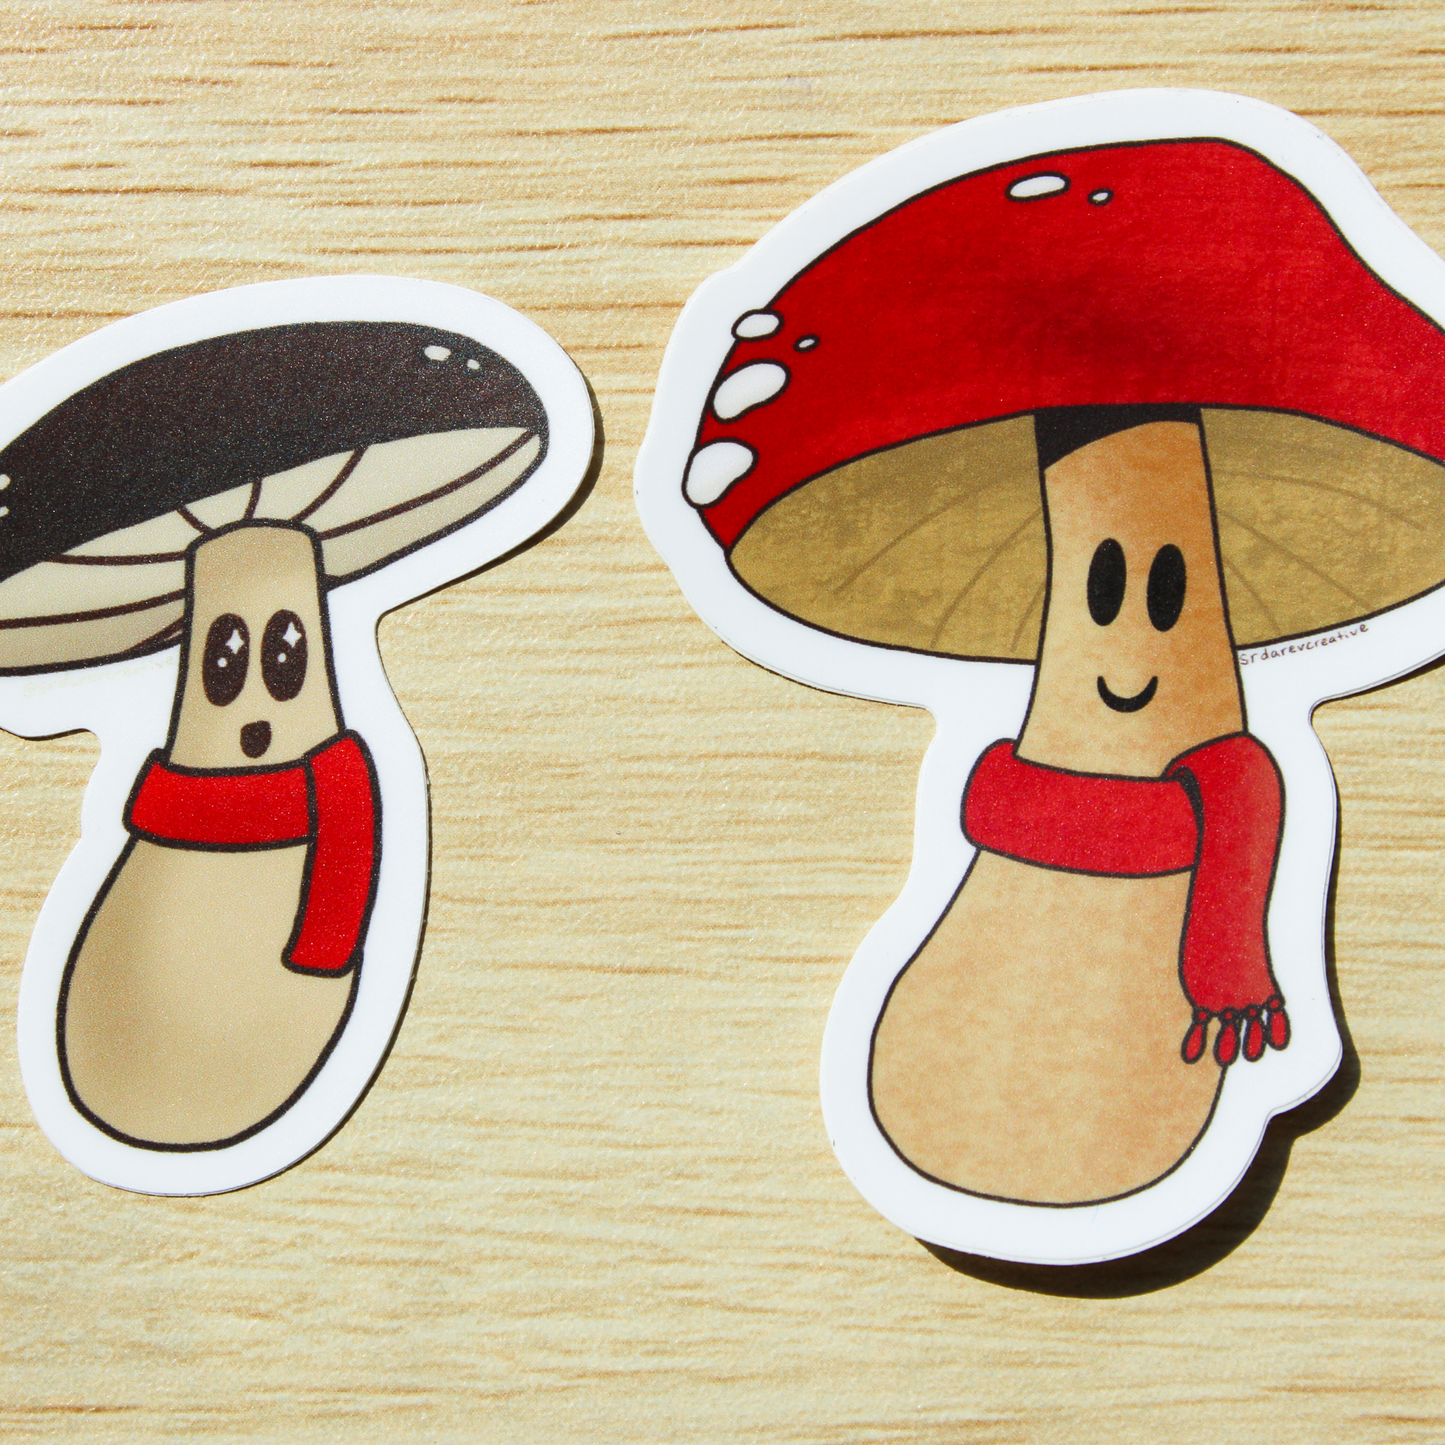 A brown wooden background. On top are two smiling mushroom stickers. On the left is a brown mushroom with a ref scarf and on the right is a red mushroom with a red scarf.